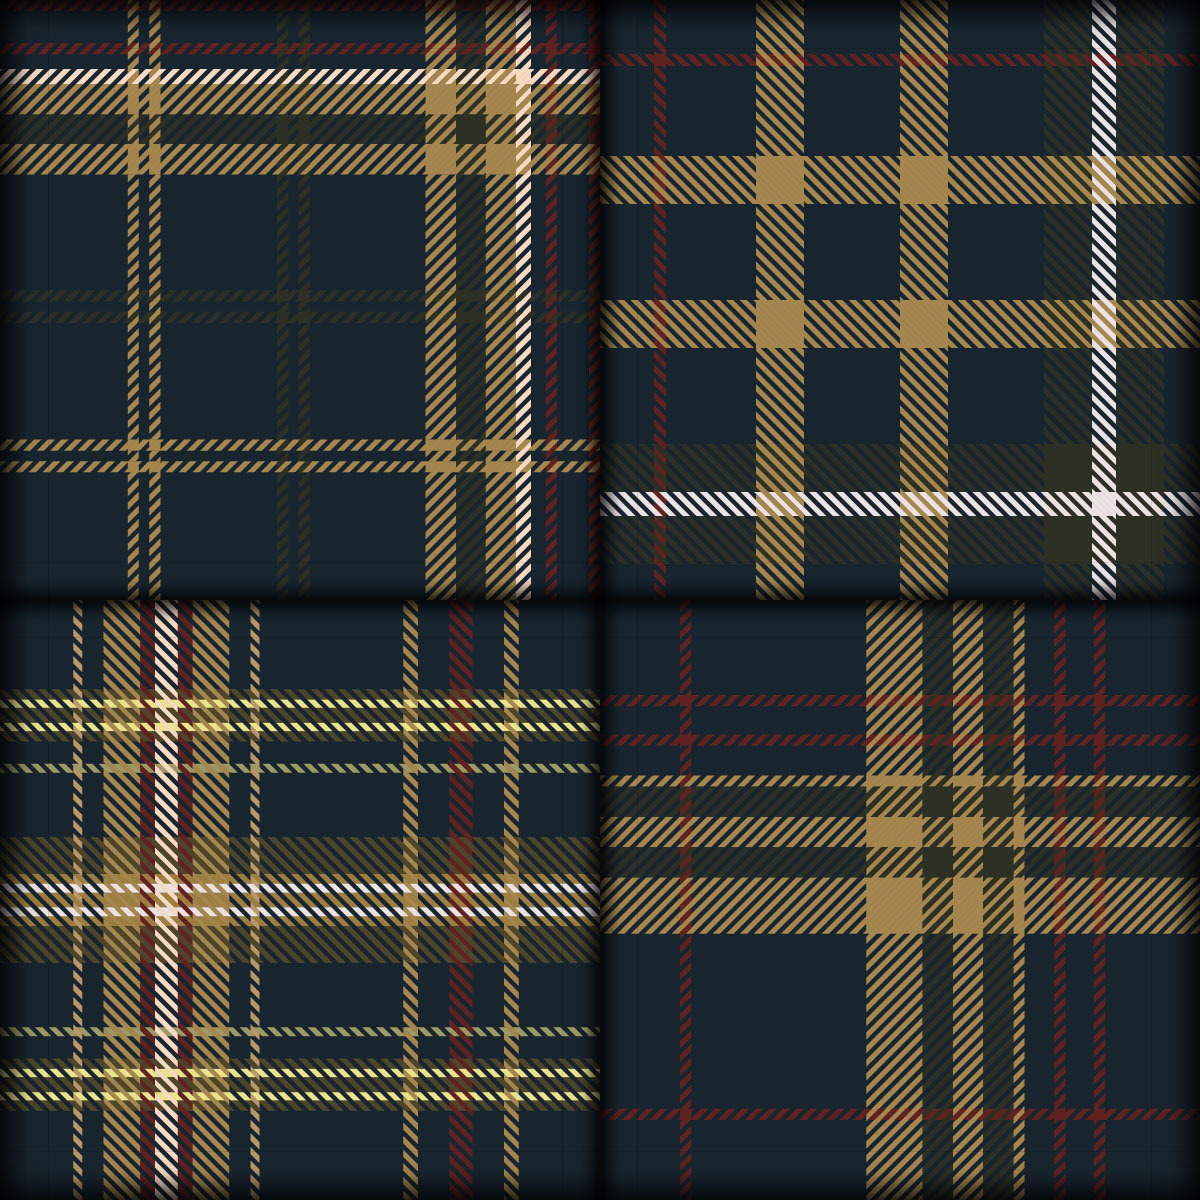 Plaid pattern is shown in three different colors.